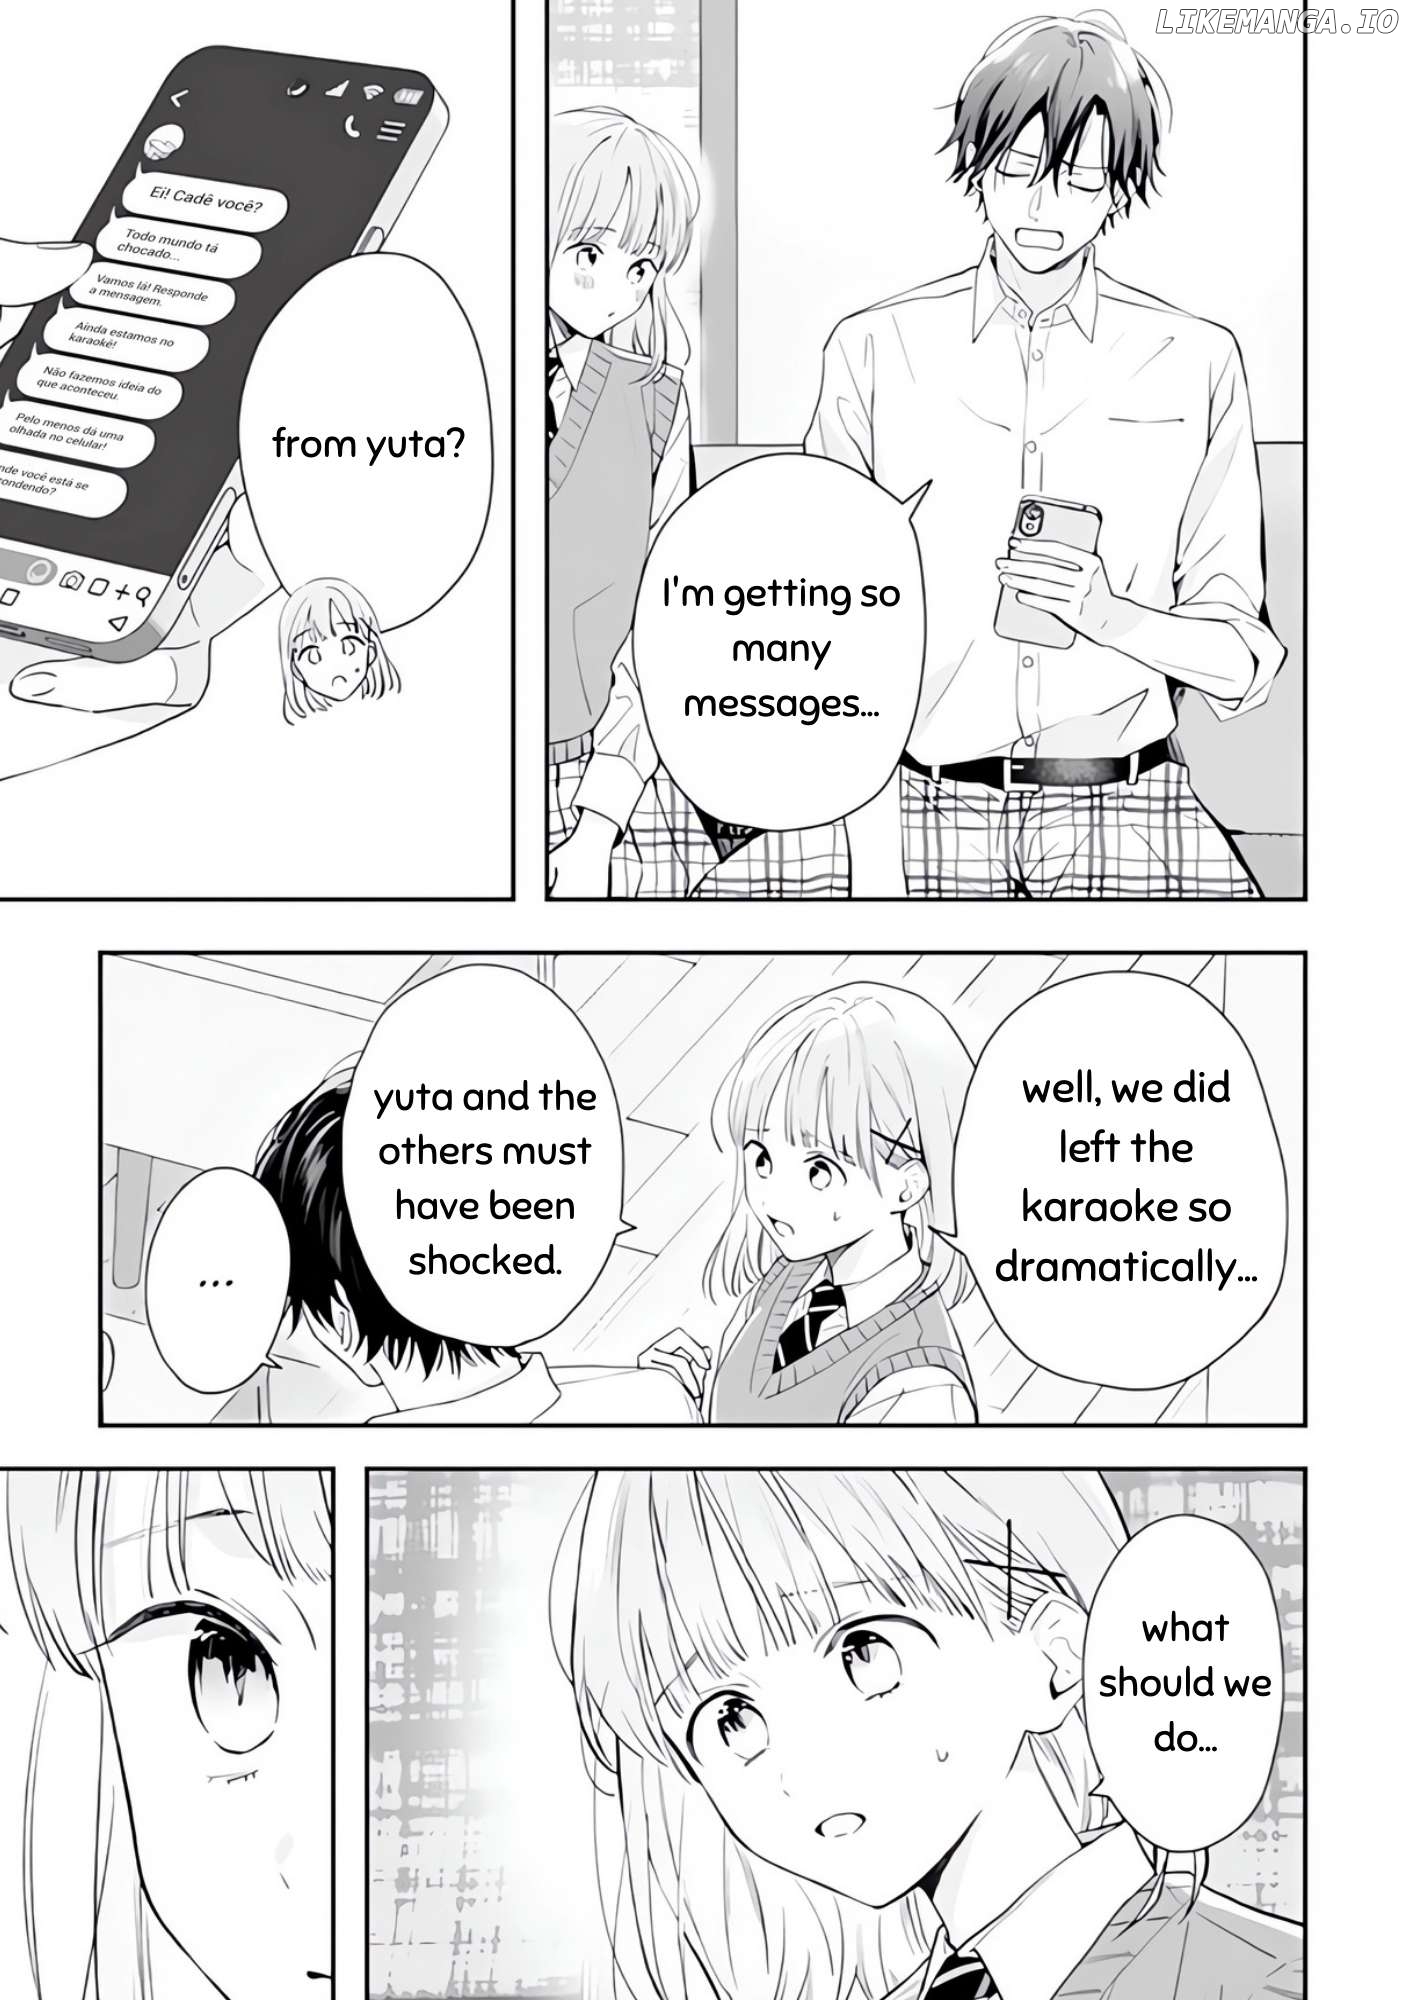 Kurosaki Wants Me All to Himself ~The Intense Sweetness of First Love~ Chapter 7.3 - page 3